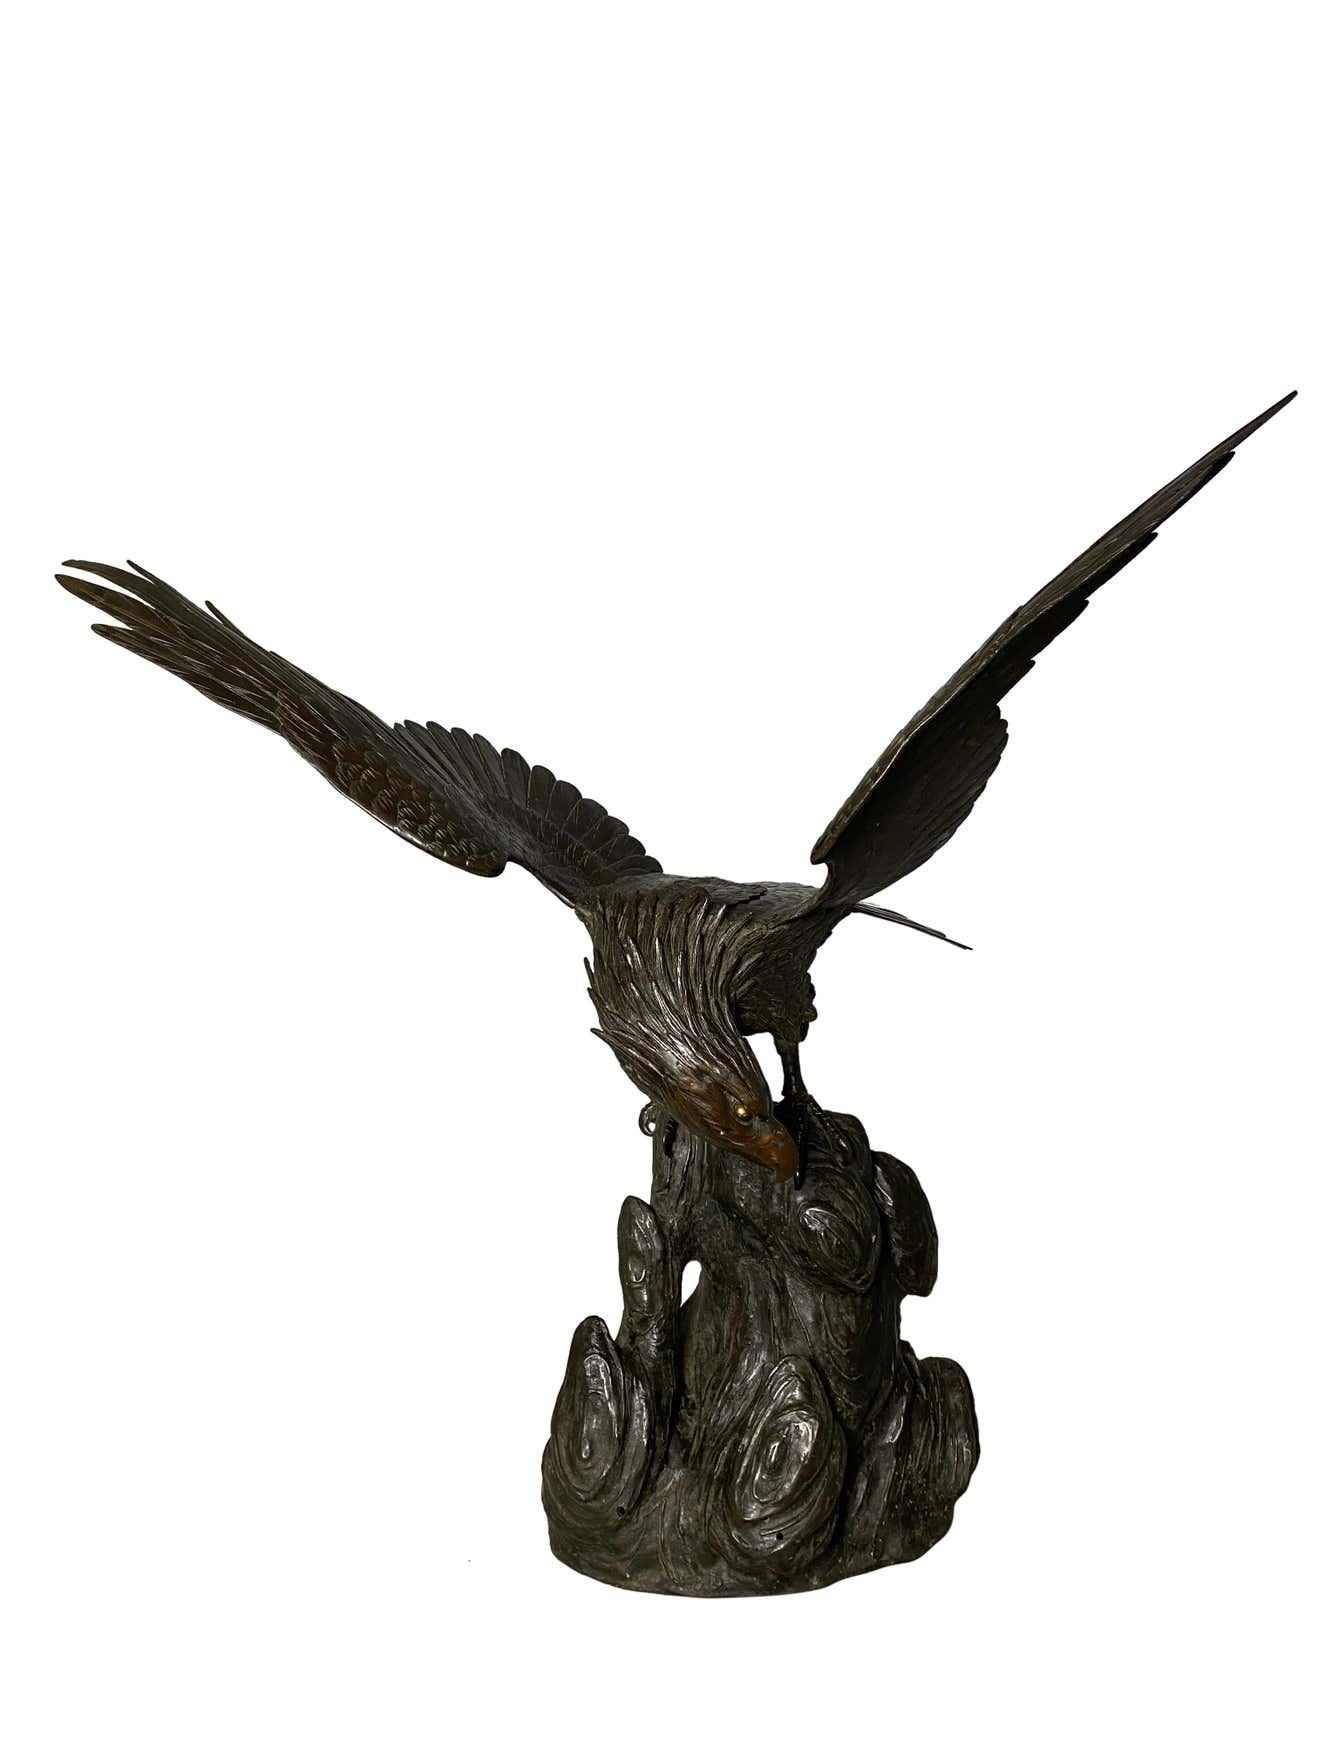 Cast Antique Japanese Bronze Eagle from the Meiji Period, 19th Century